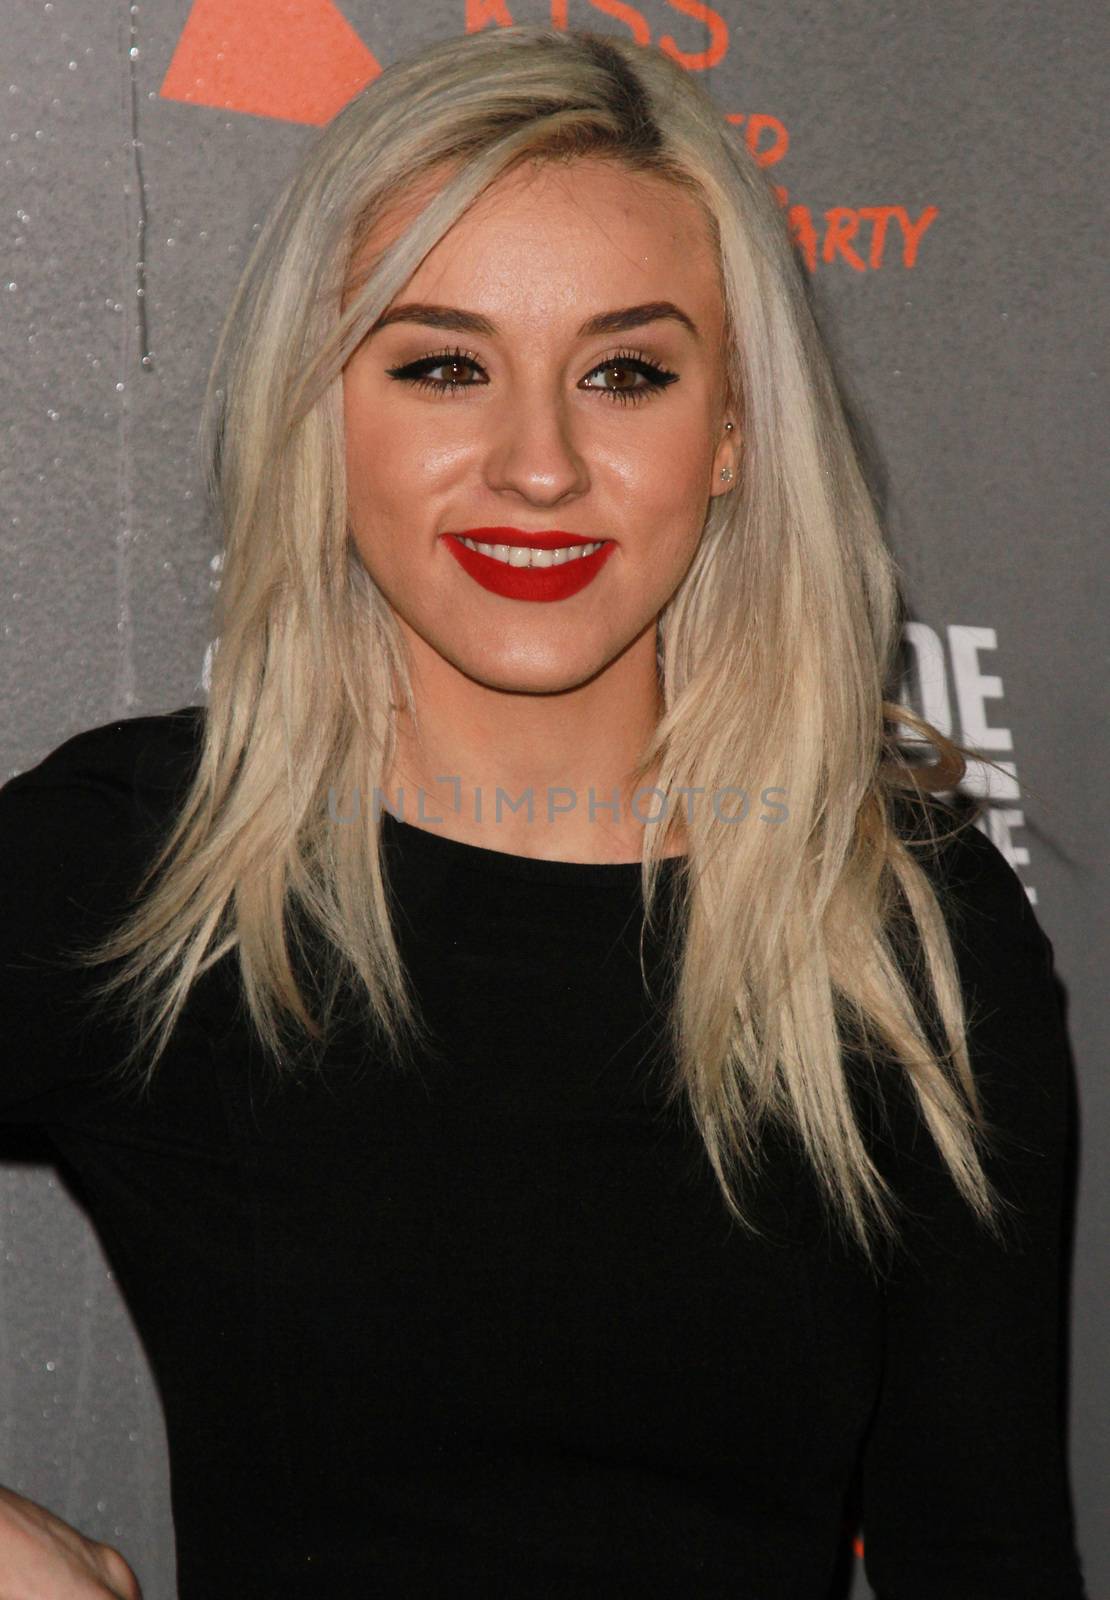 ENGLAND, London: Ebru Ellis attended the Kiss FM Haunted House Party in London on October 29, 2015. Costumes ranging from the Rock band KISS to the devil were on display as various stars walked the red carpet at the party which featured musical performances by Rita Ora, Jason Derulo and band Little Mix.